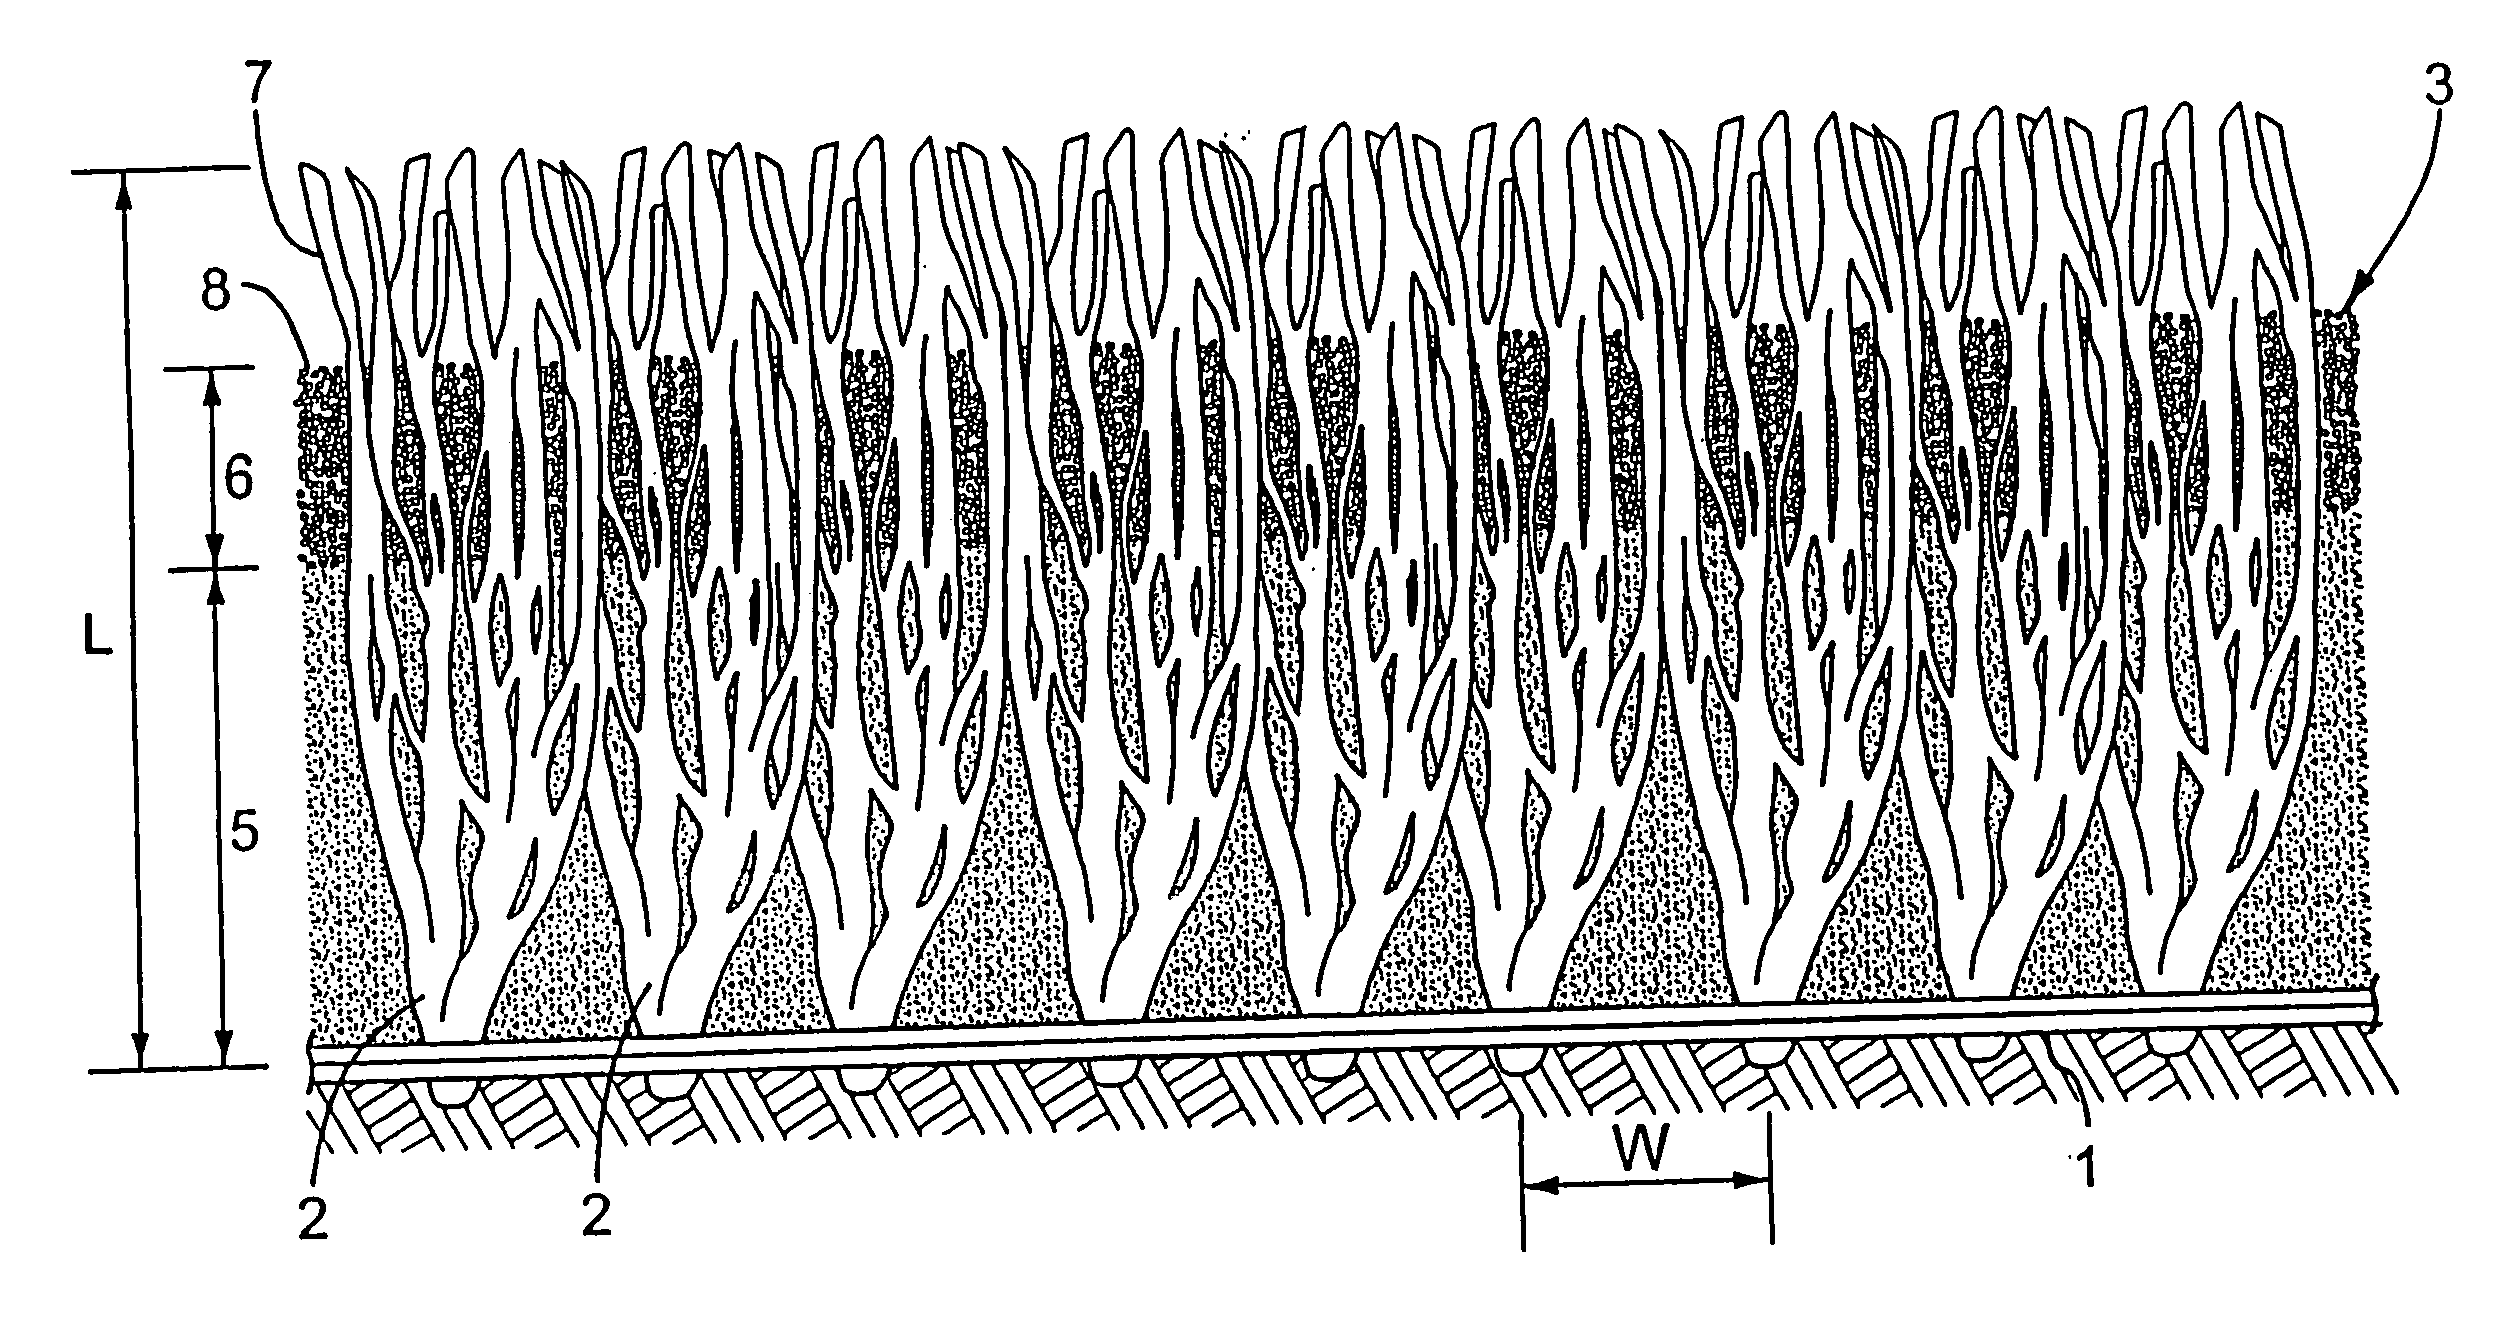 Synthetic grass with resilient granular top surface layer